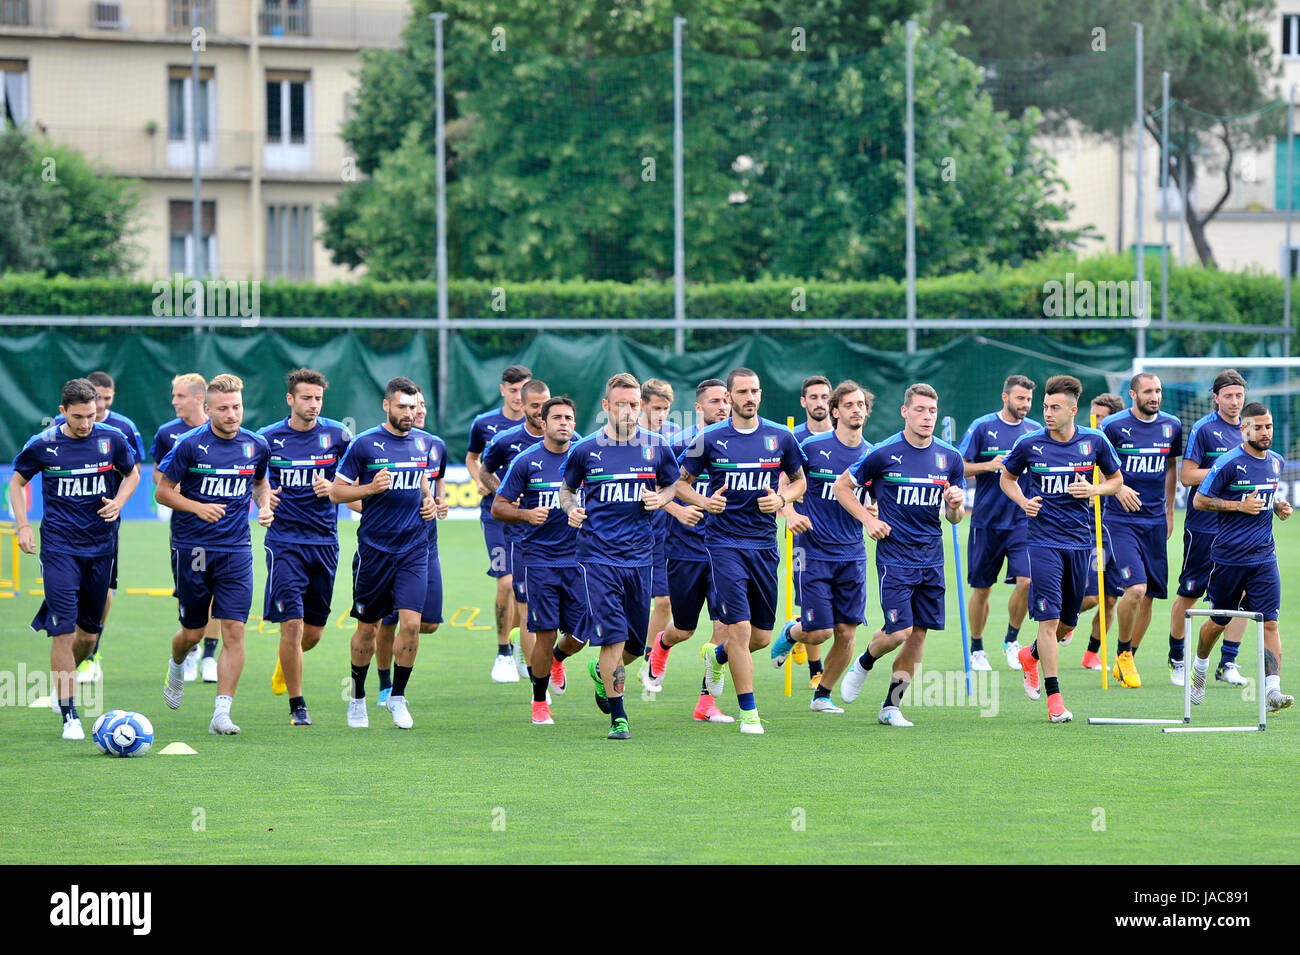 Florence, Italy. 05th June, 2017. Italy's players during the training session at the Coverciano Training Center. The Italian national team will face in a friendly match the Uruguay national team in Nice on 7th June 2017 and Liechtenstein in Udine on 11th June 2017, match valid for FIFA World Cup Russia 2018 Qualifiers Europe Group G. Credit: Giacomo Morini/Pacific Press/Alamy Live News Stock Photo